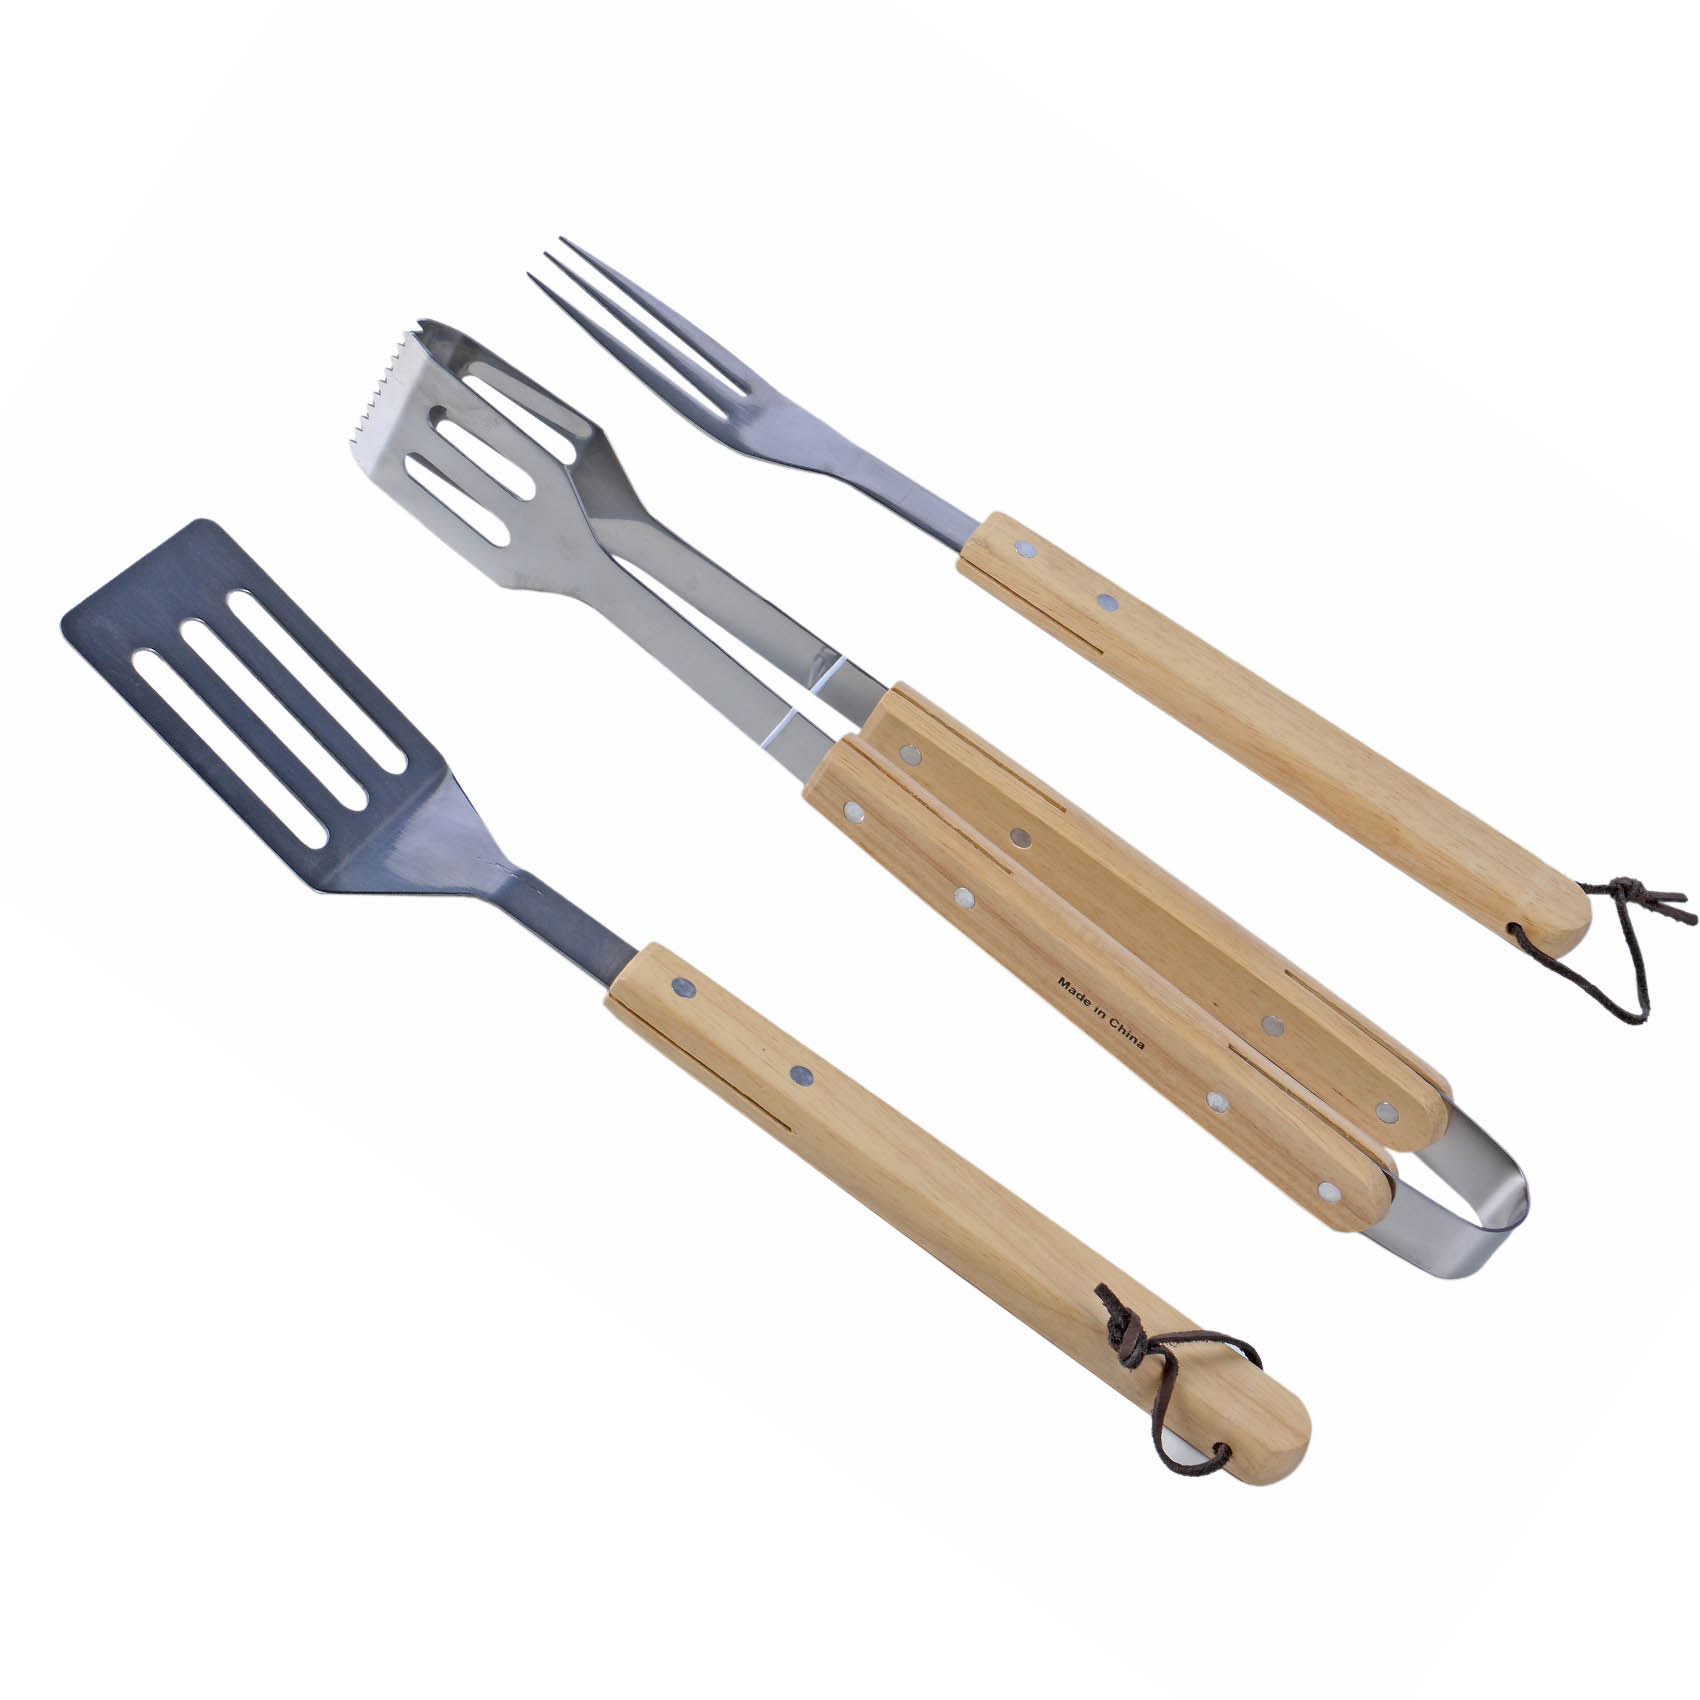 CAMPMATE 3 pcs STEEL BARBEQUE TOOLS WITH WOODEN HANDLE BBQ-03M-07